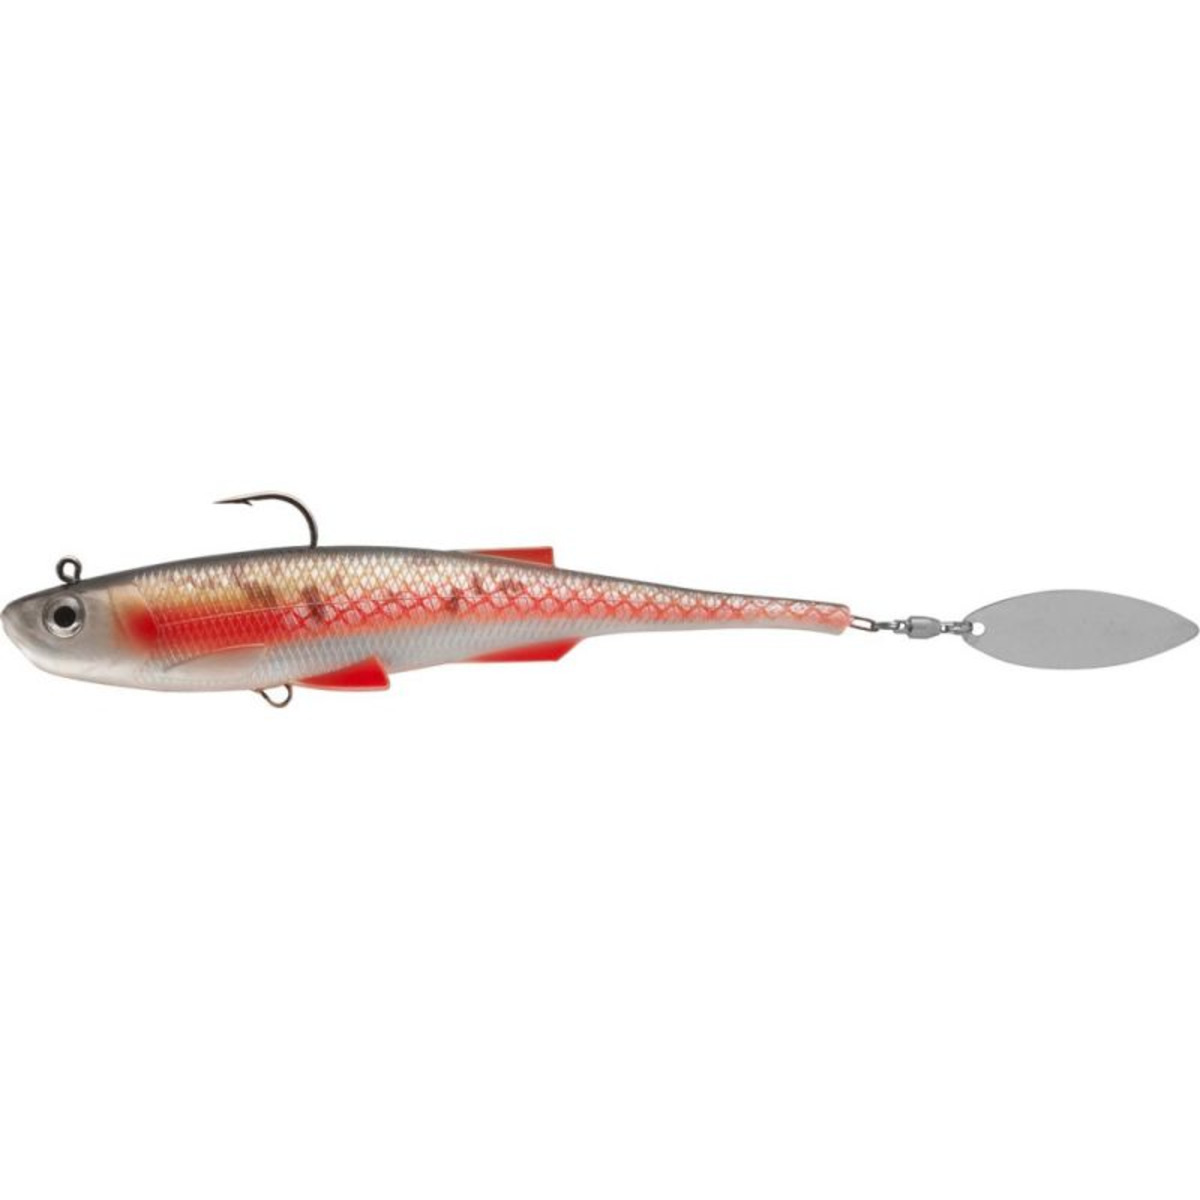 Rapture Mad Spintail Shad - 60.0 g - 150 mm - RC